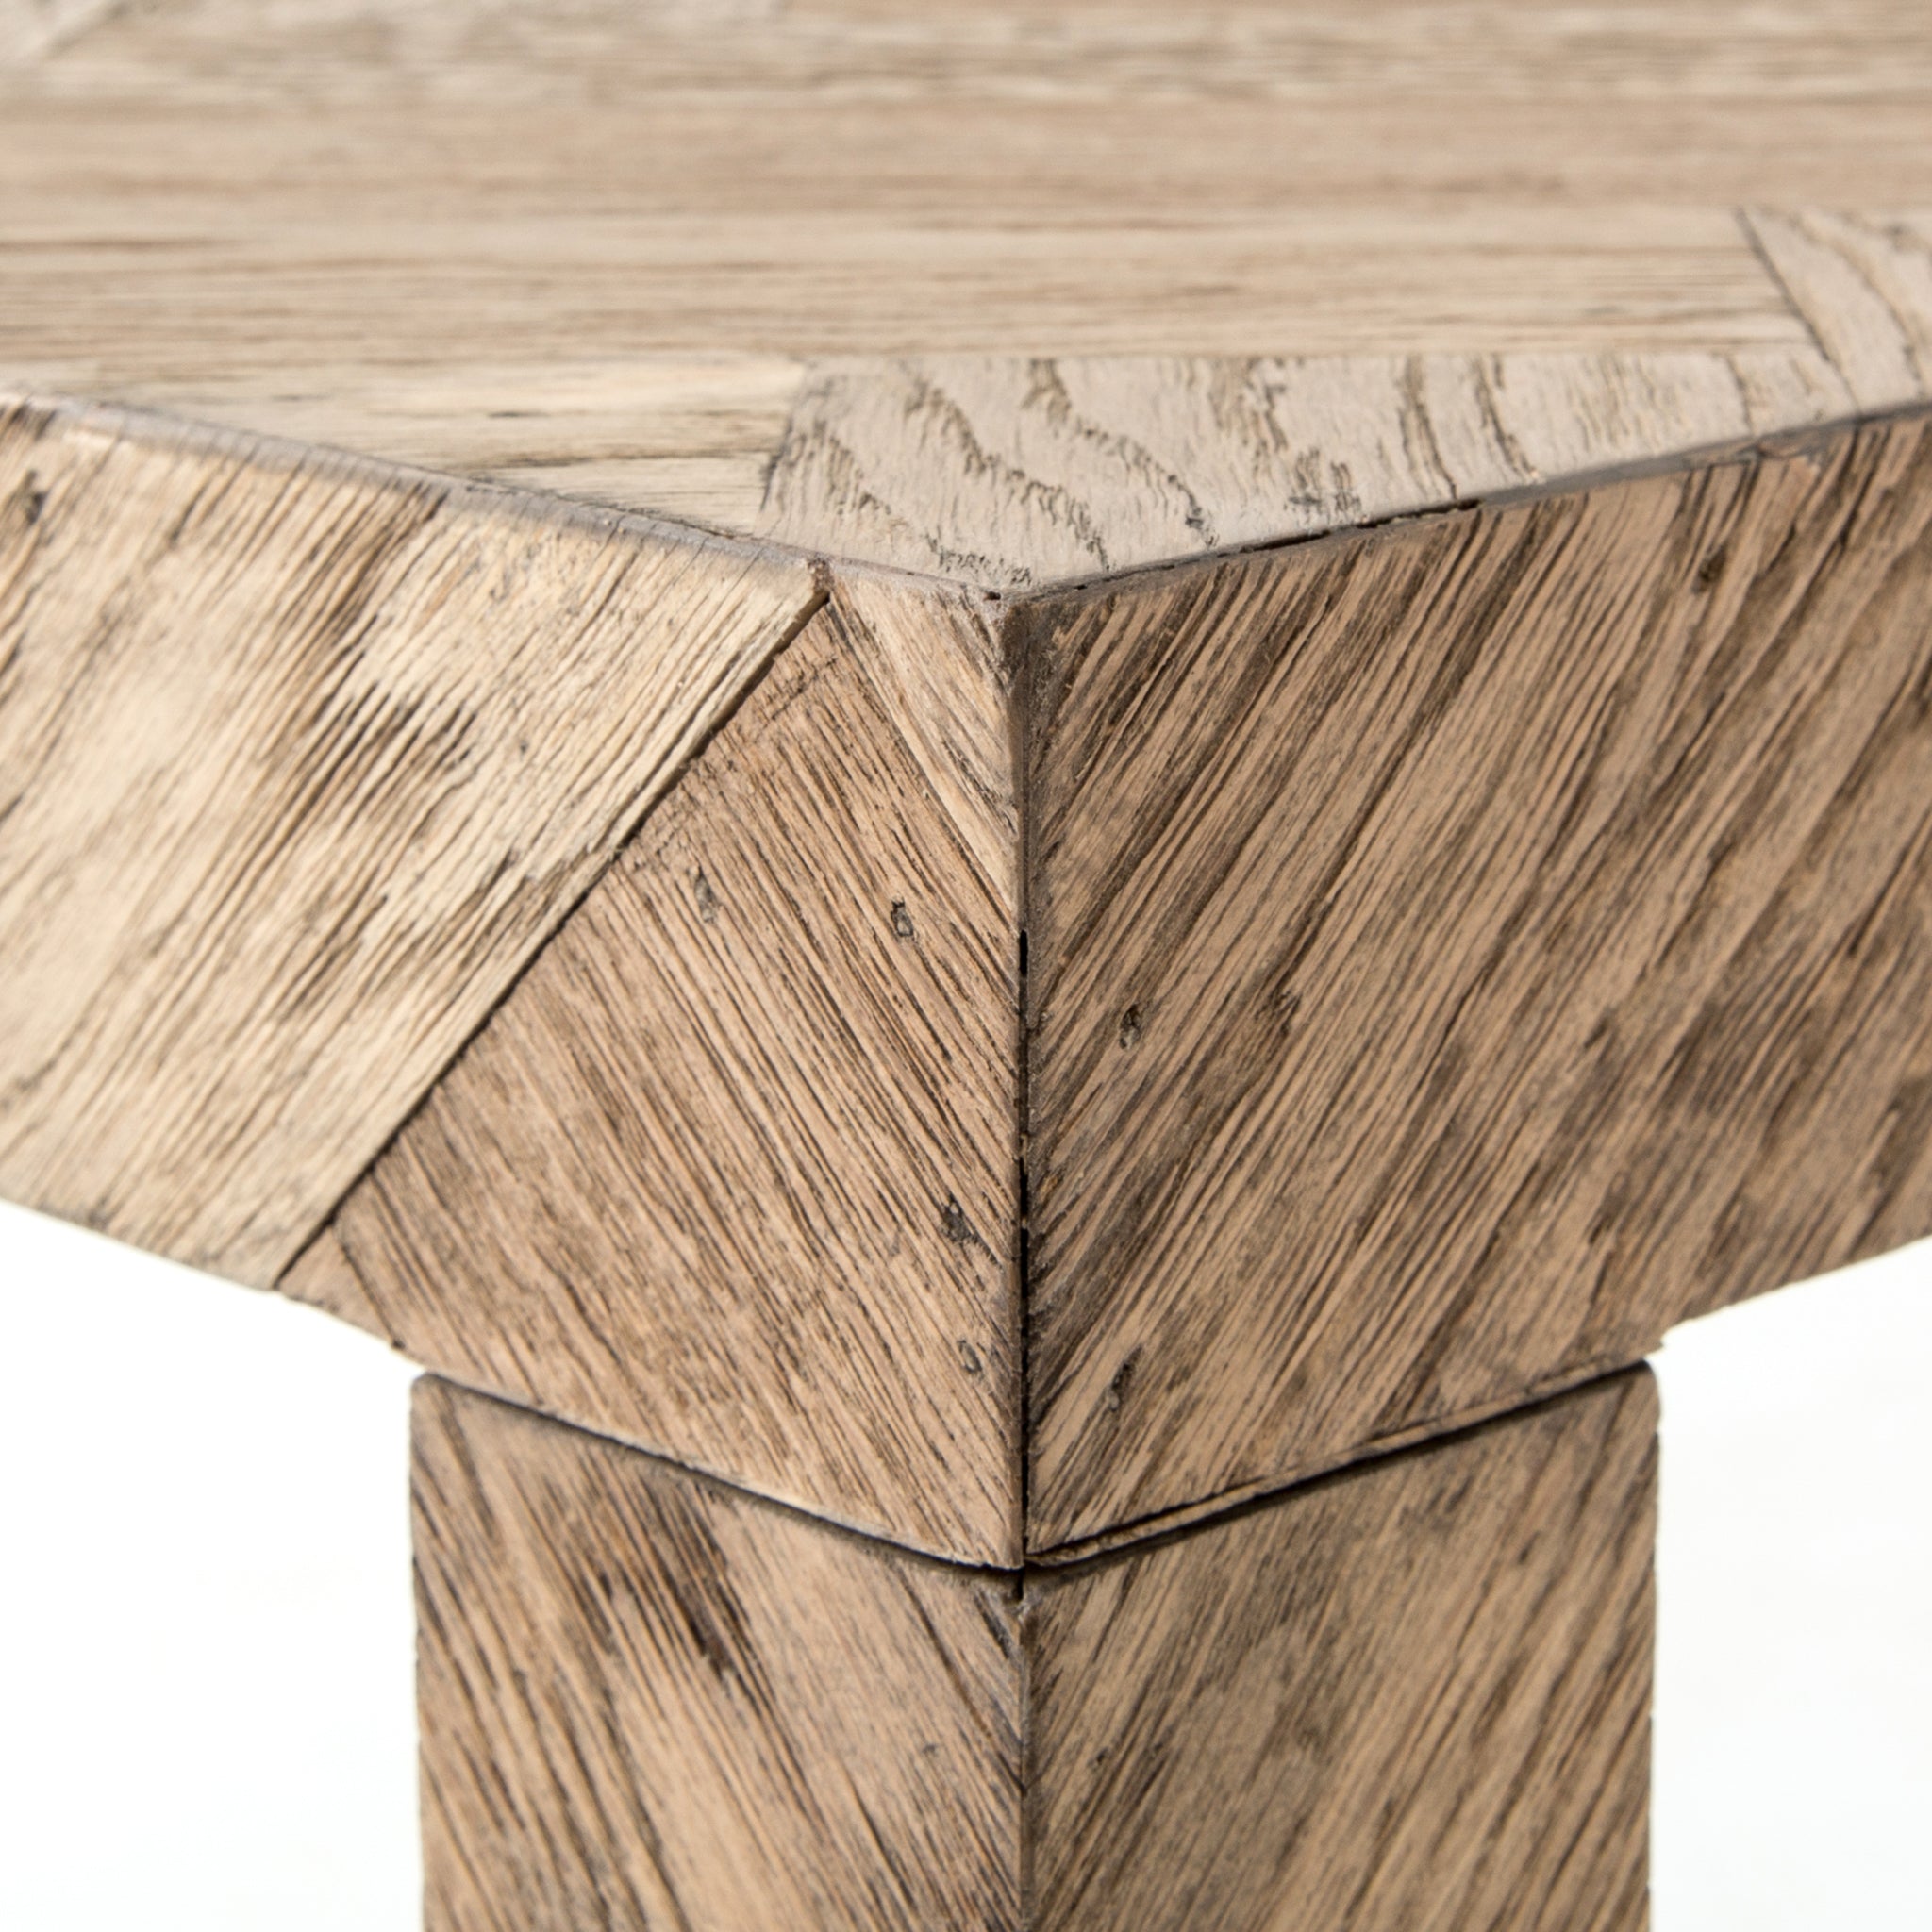 The simplest answer is often the right one. This deceptively simple Parsons-style table offers grandly exaggerated dimensions and a subtle, herringbone parquet pattern on every surface.   Overall Dimensions: 70.75"w x 19.75"d x 31.50"h  